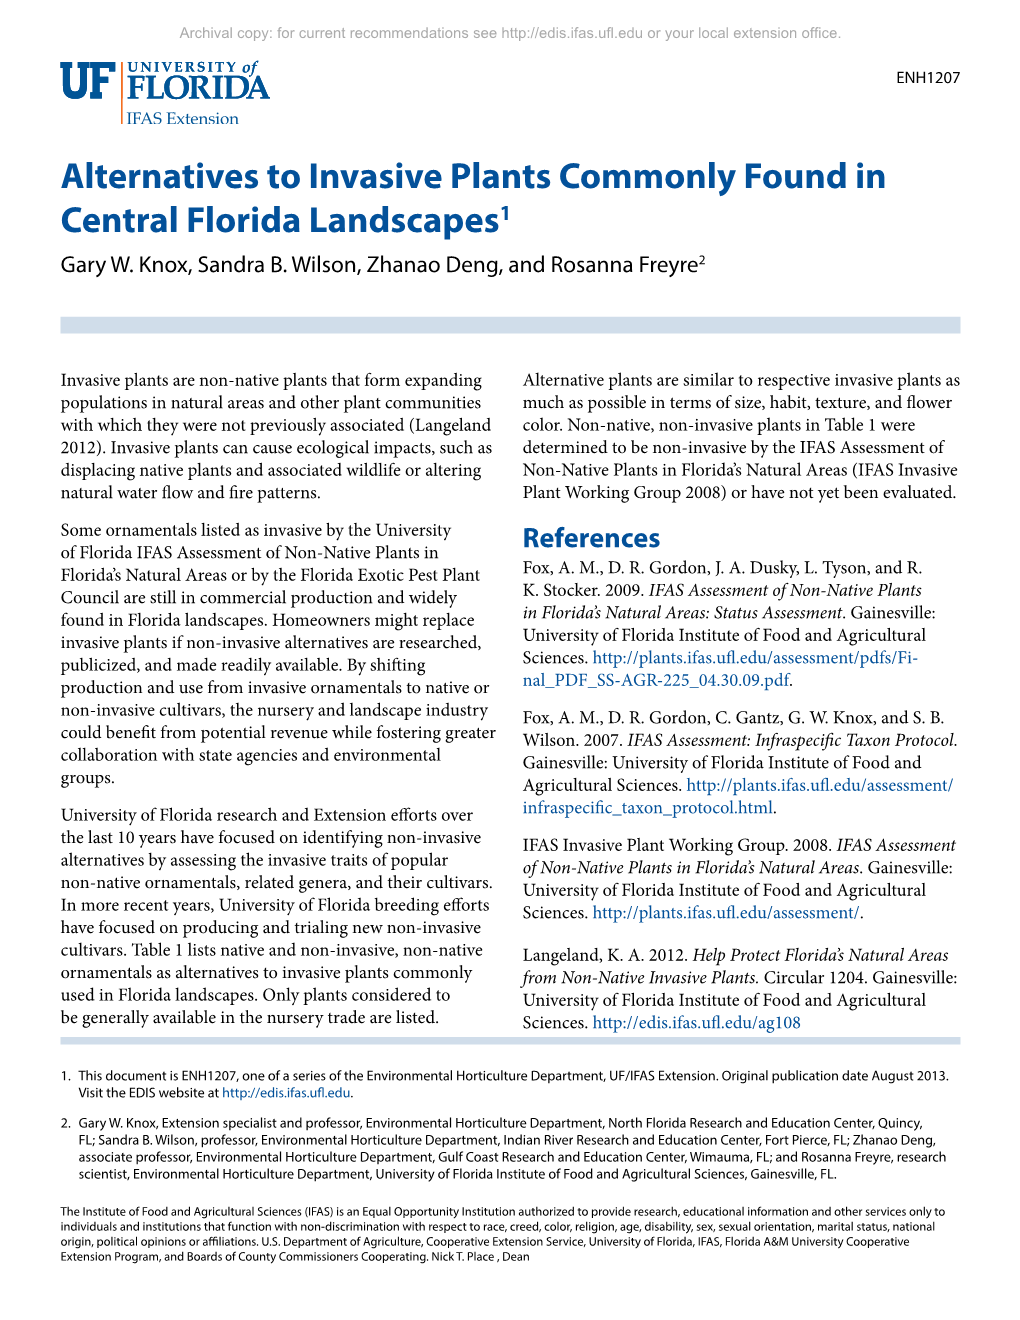 Alternatives to Invasive Plants Commonly Found in Central Florida Landscapes1 Gary W